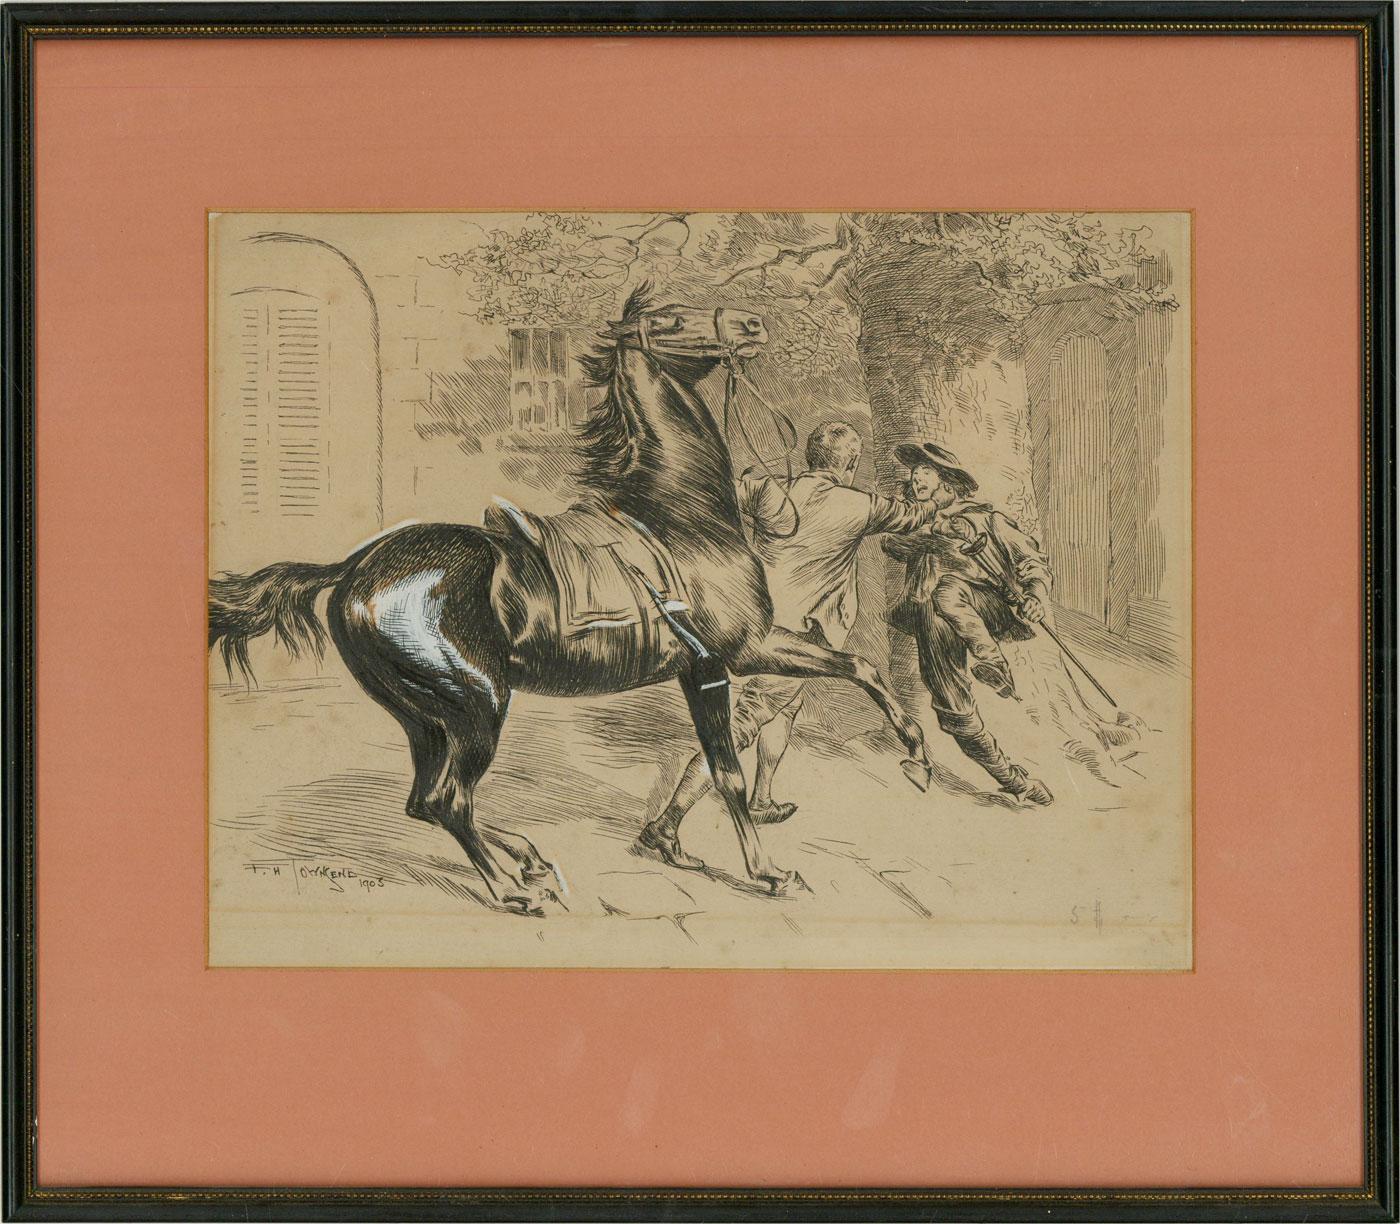 A dynamic pen and ink drawing, showing a man swinging a punch at an unsuspecting opponent who is reaching for their sword, falling back in shock. The assailant's horse rears up in the foreground. The artist has signed and dated to the lower left